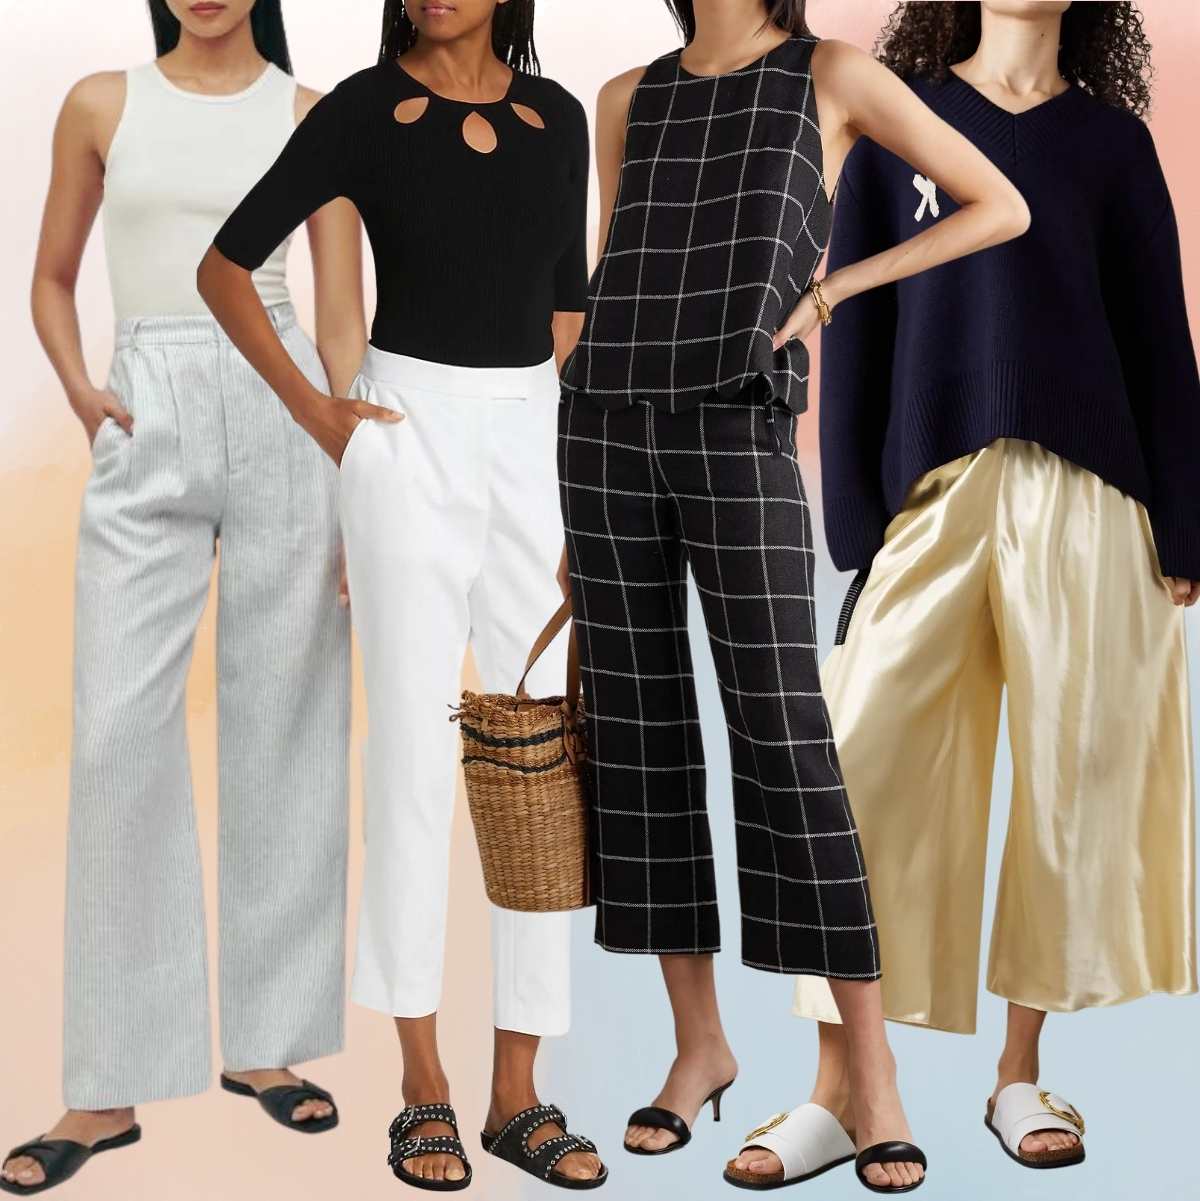 Collage of 5 women wearing different slides outfits with dress pants.